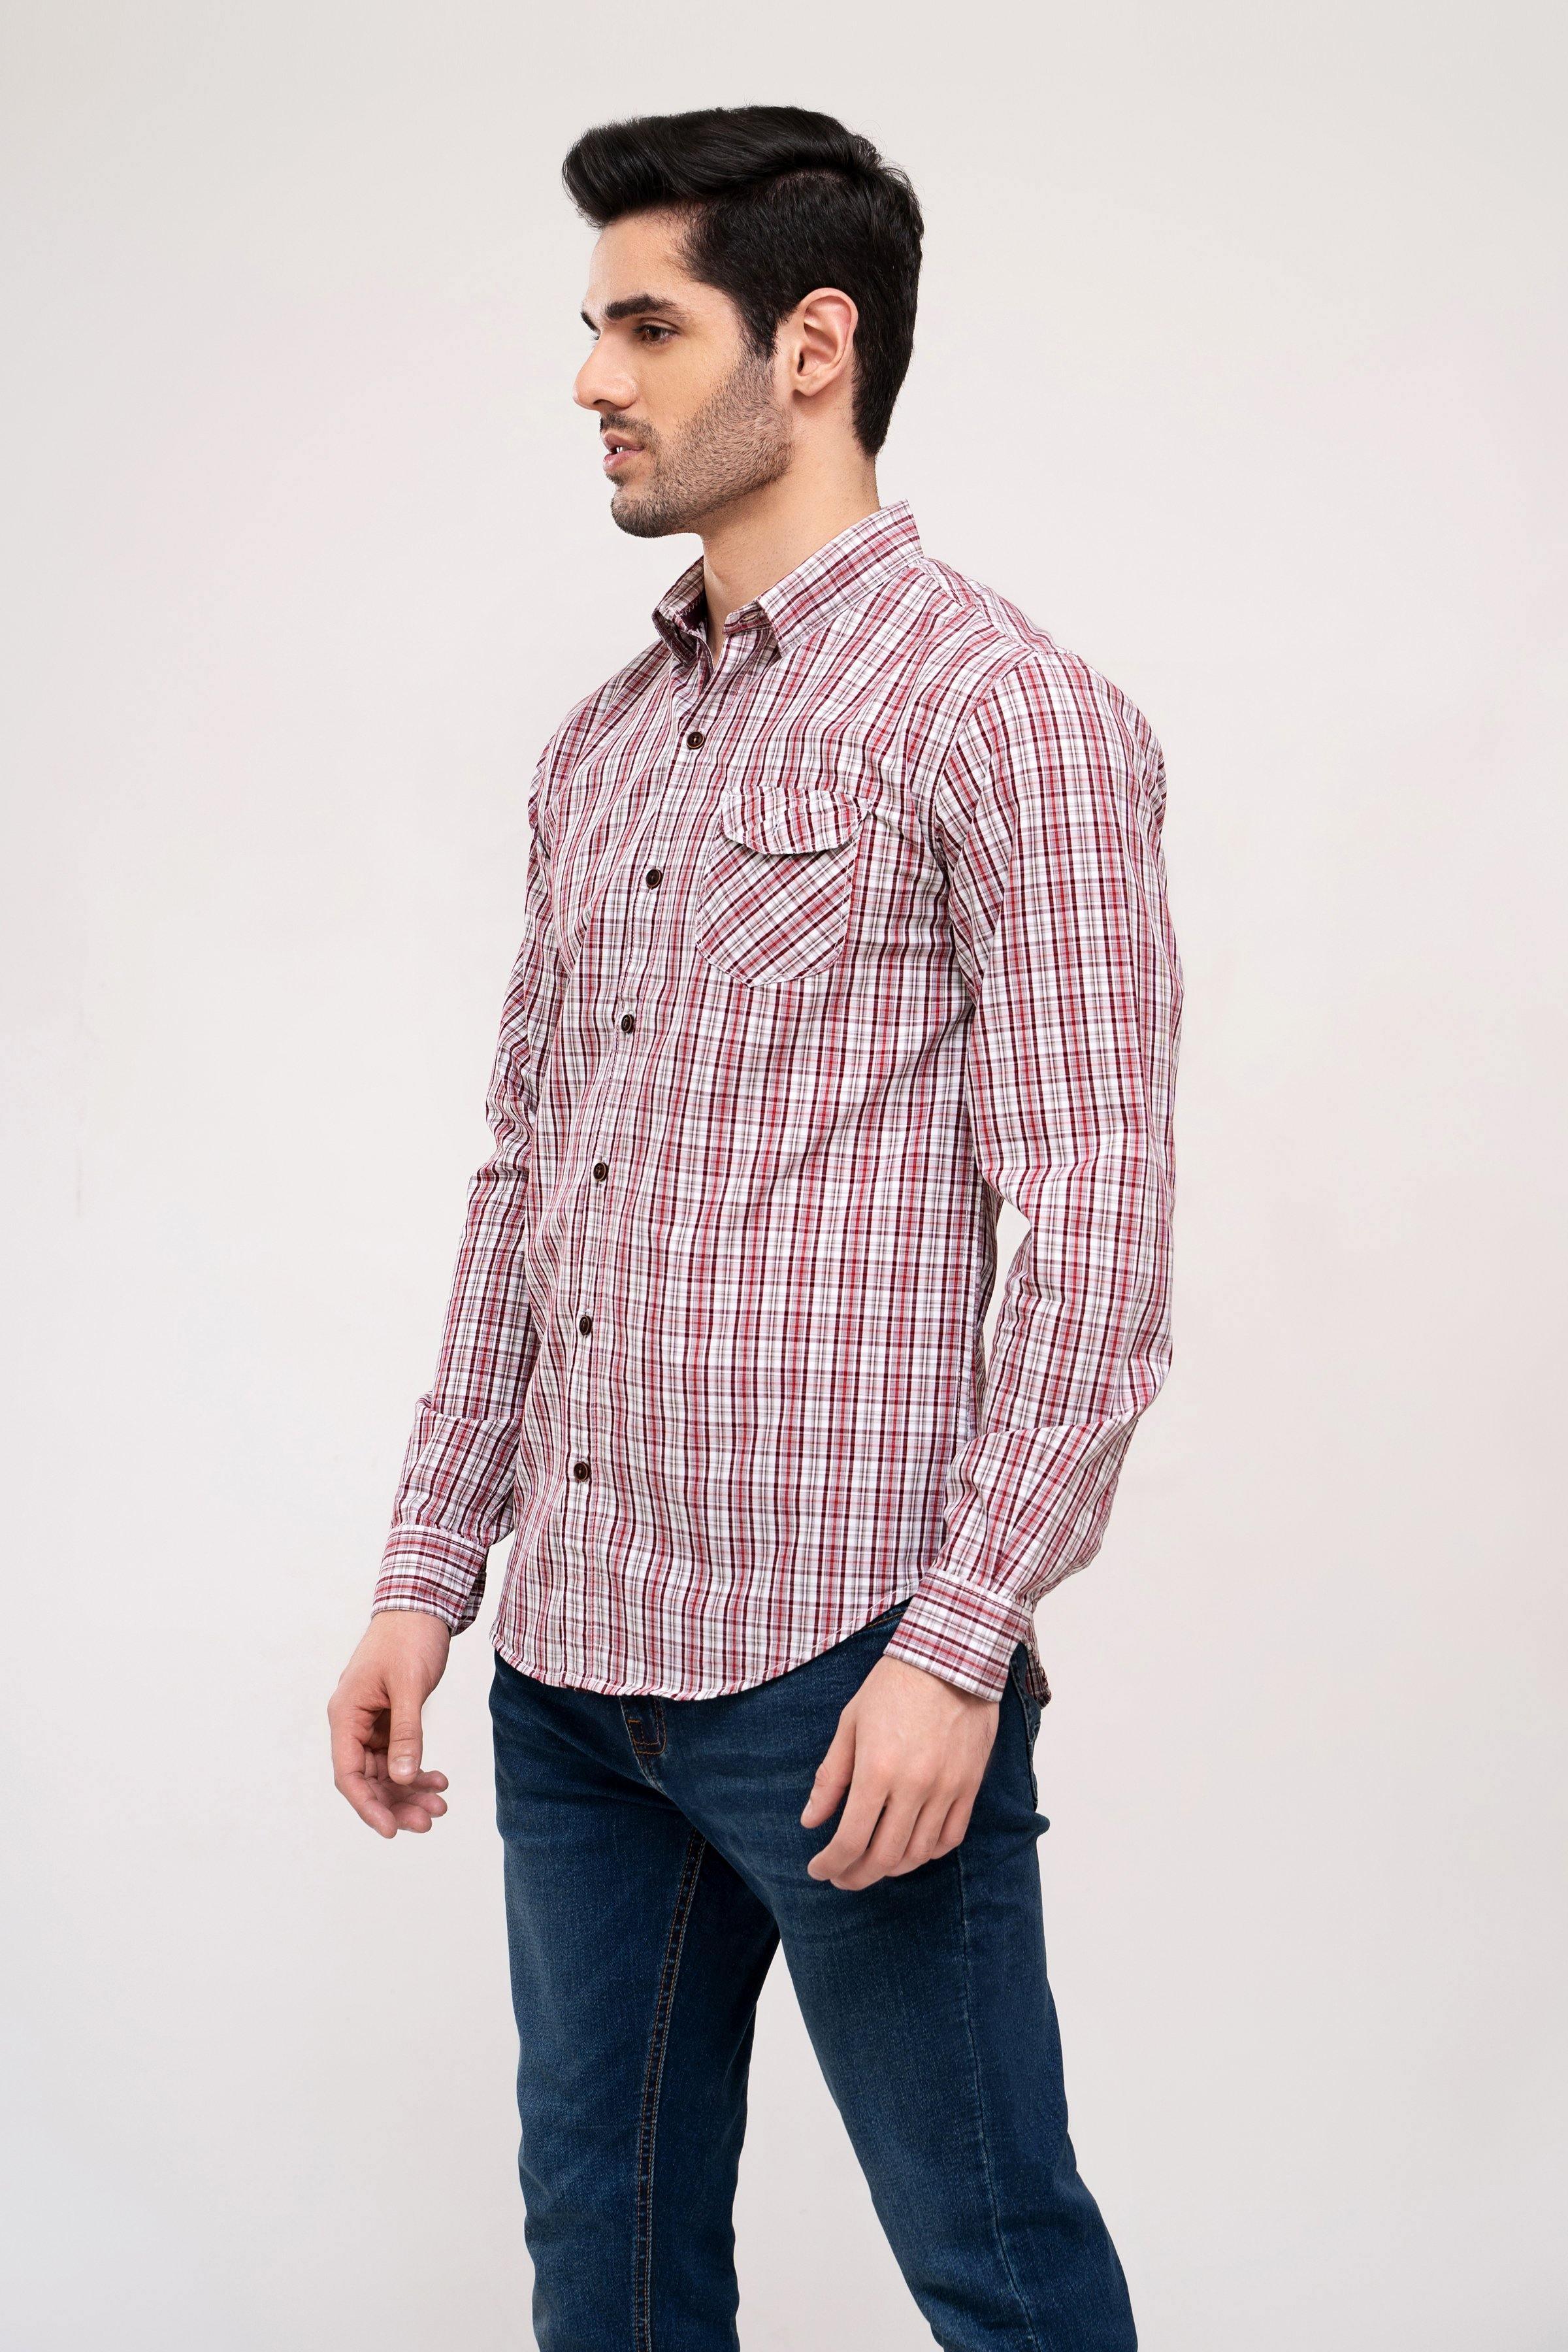 CASUAL SHIRT OFF WHITE MAROON at Charcoal Clothing